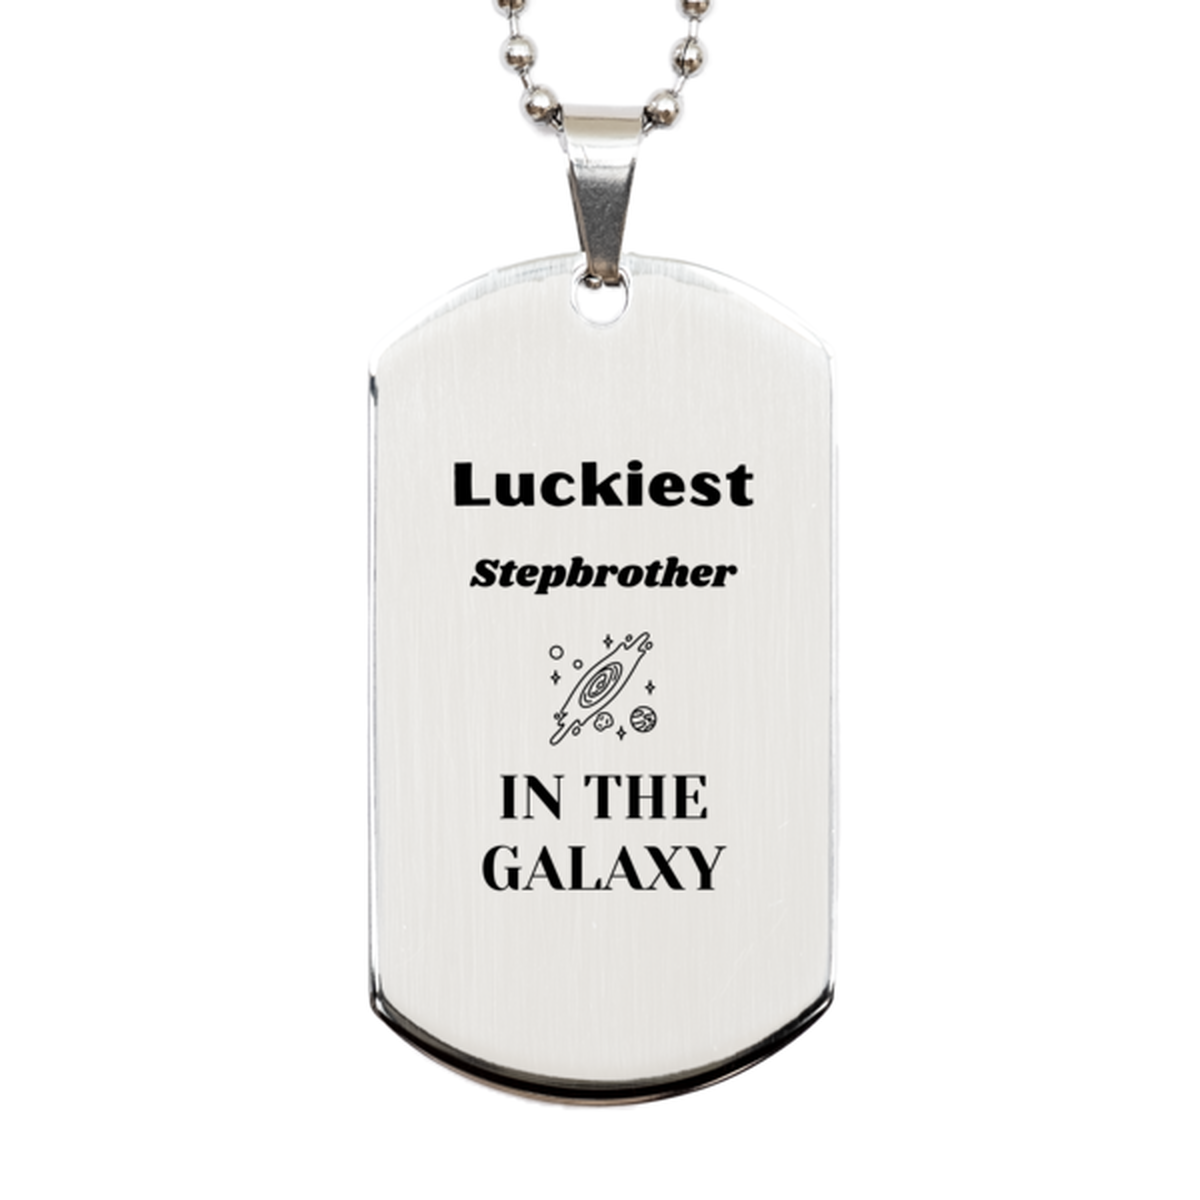 Luckiest Stepbrother in the Galaxy, To My Stepbrother Engraved Gifts, Christmas Stepbrother Silver Dog Tag Gifts, X-mas Birthday Unique Gifts For Stepbrother Men Women